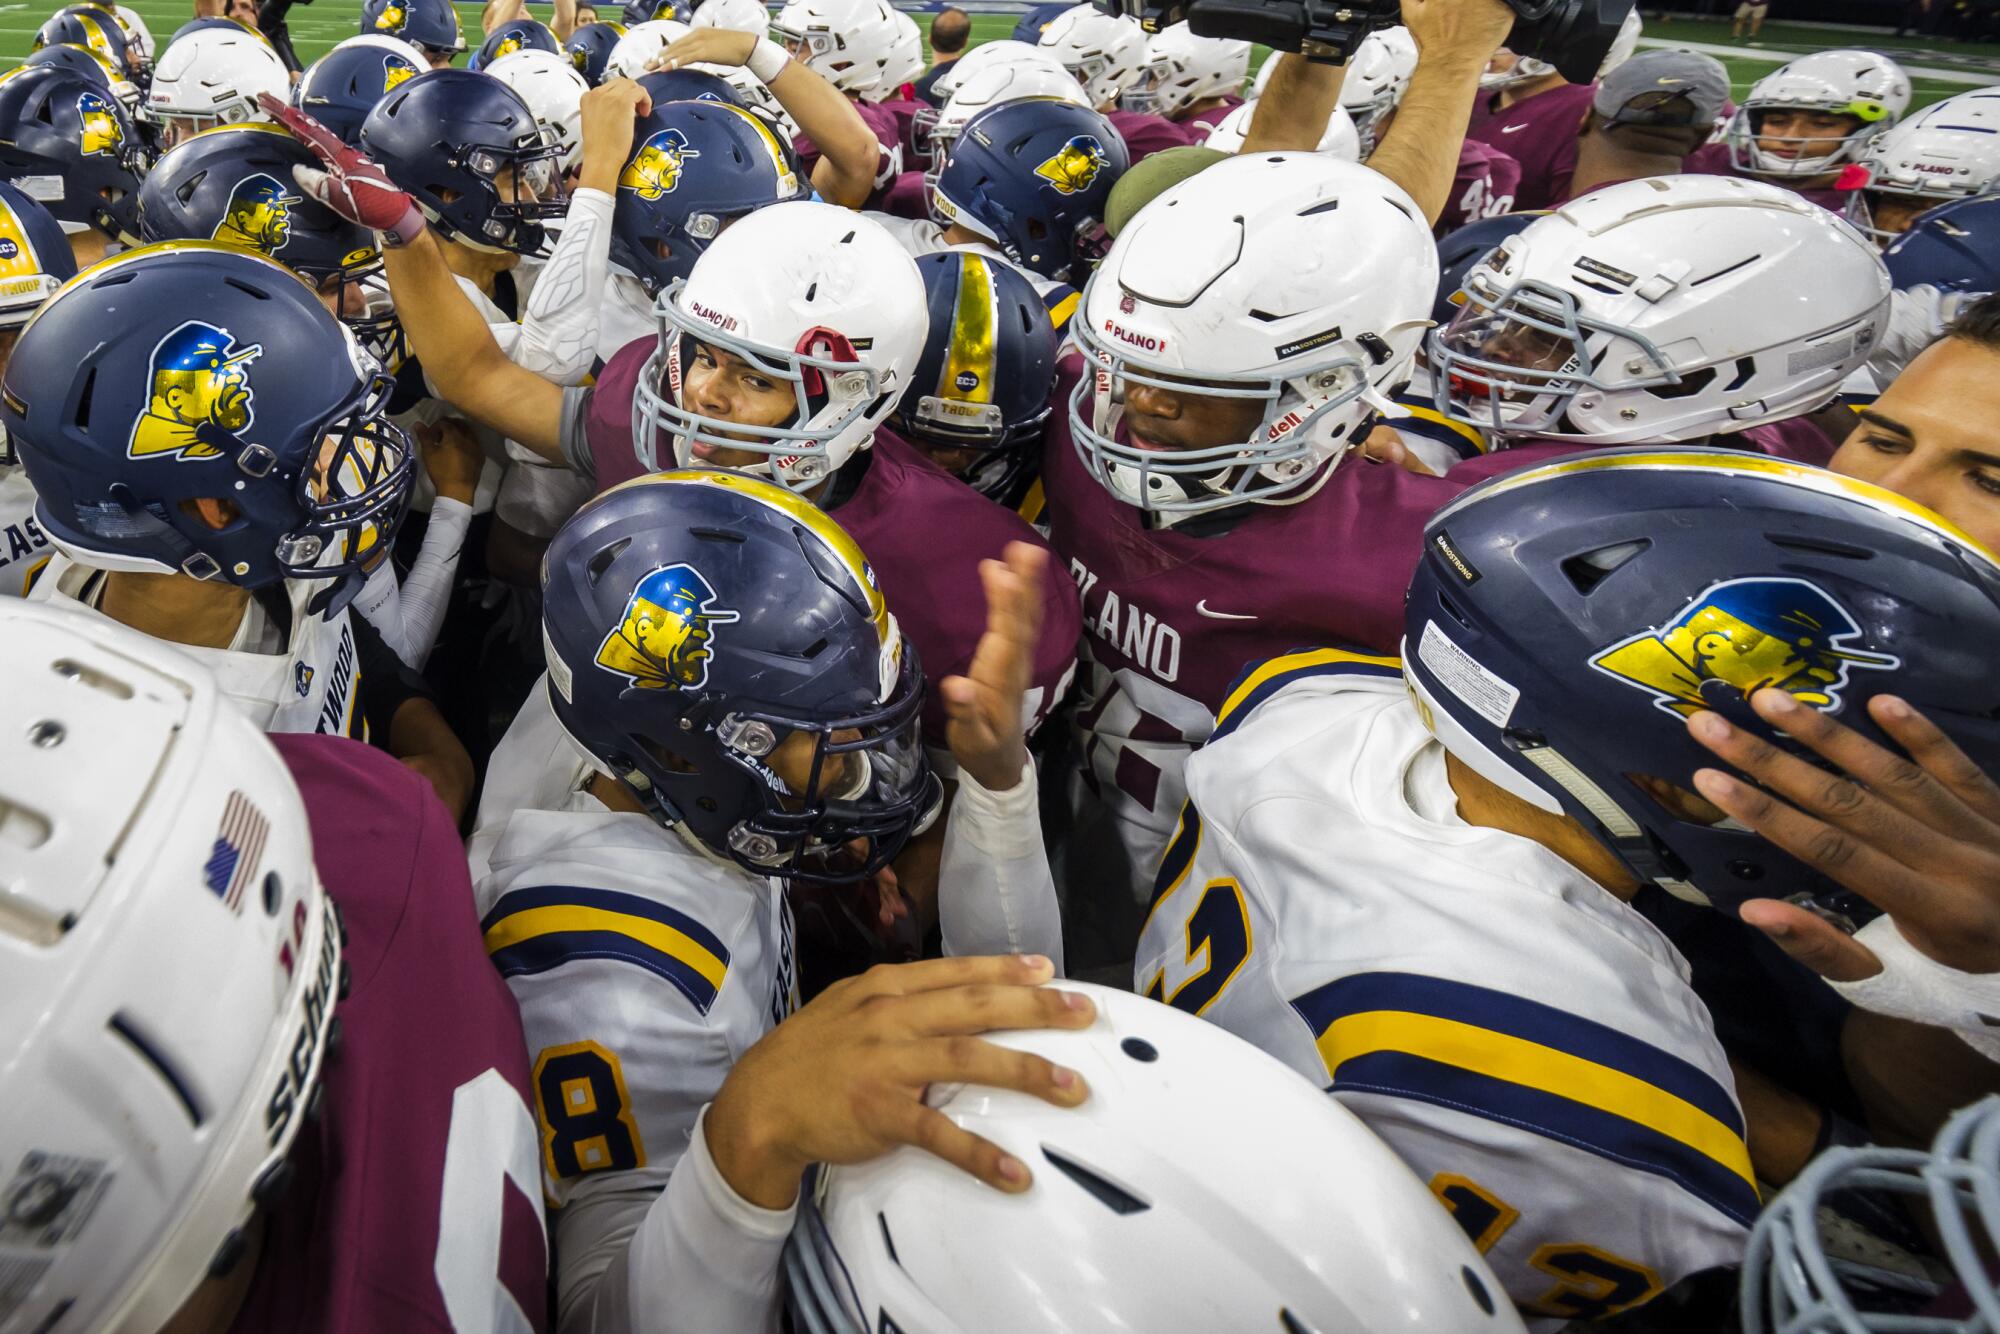 Players from Plano and El Paso Eastwood meet at midfield before their game on Sept. 5.